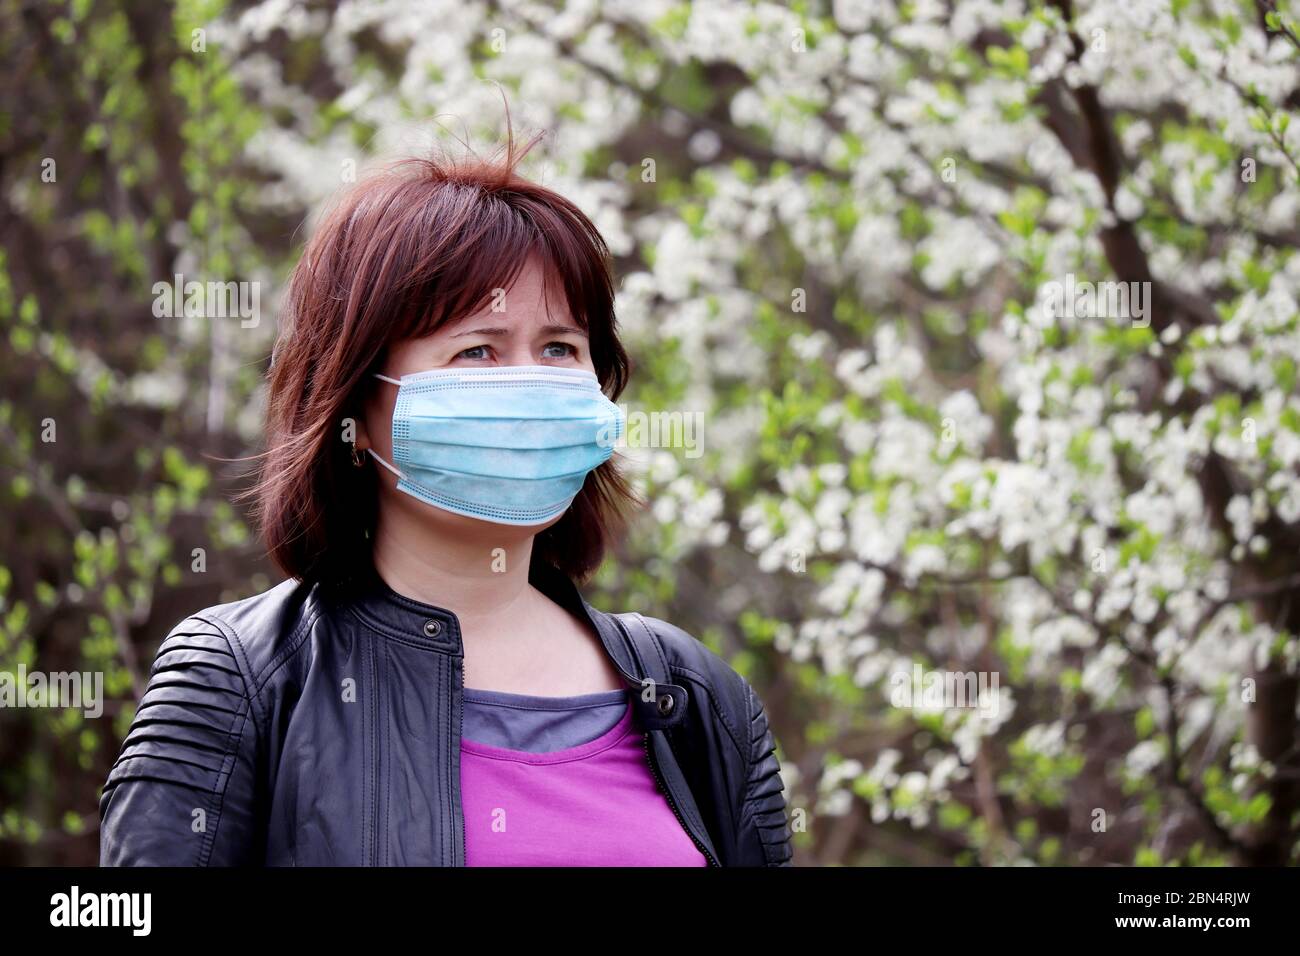 Woman in medical protective mask in a spring garden on cherry blossom background. Concept of quarantine during covid-19 coronavirus pandemic Stock Photo